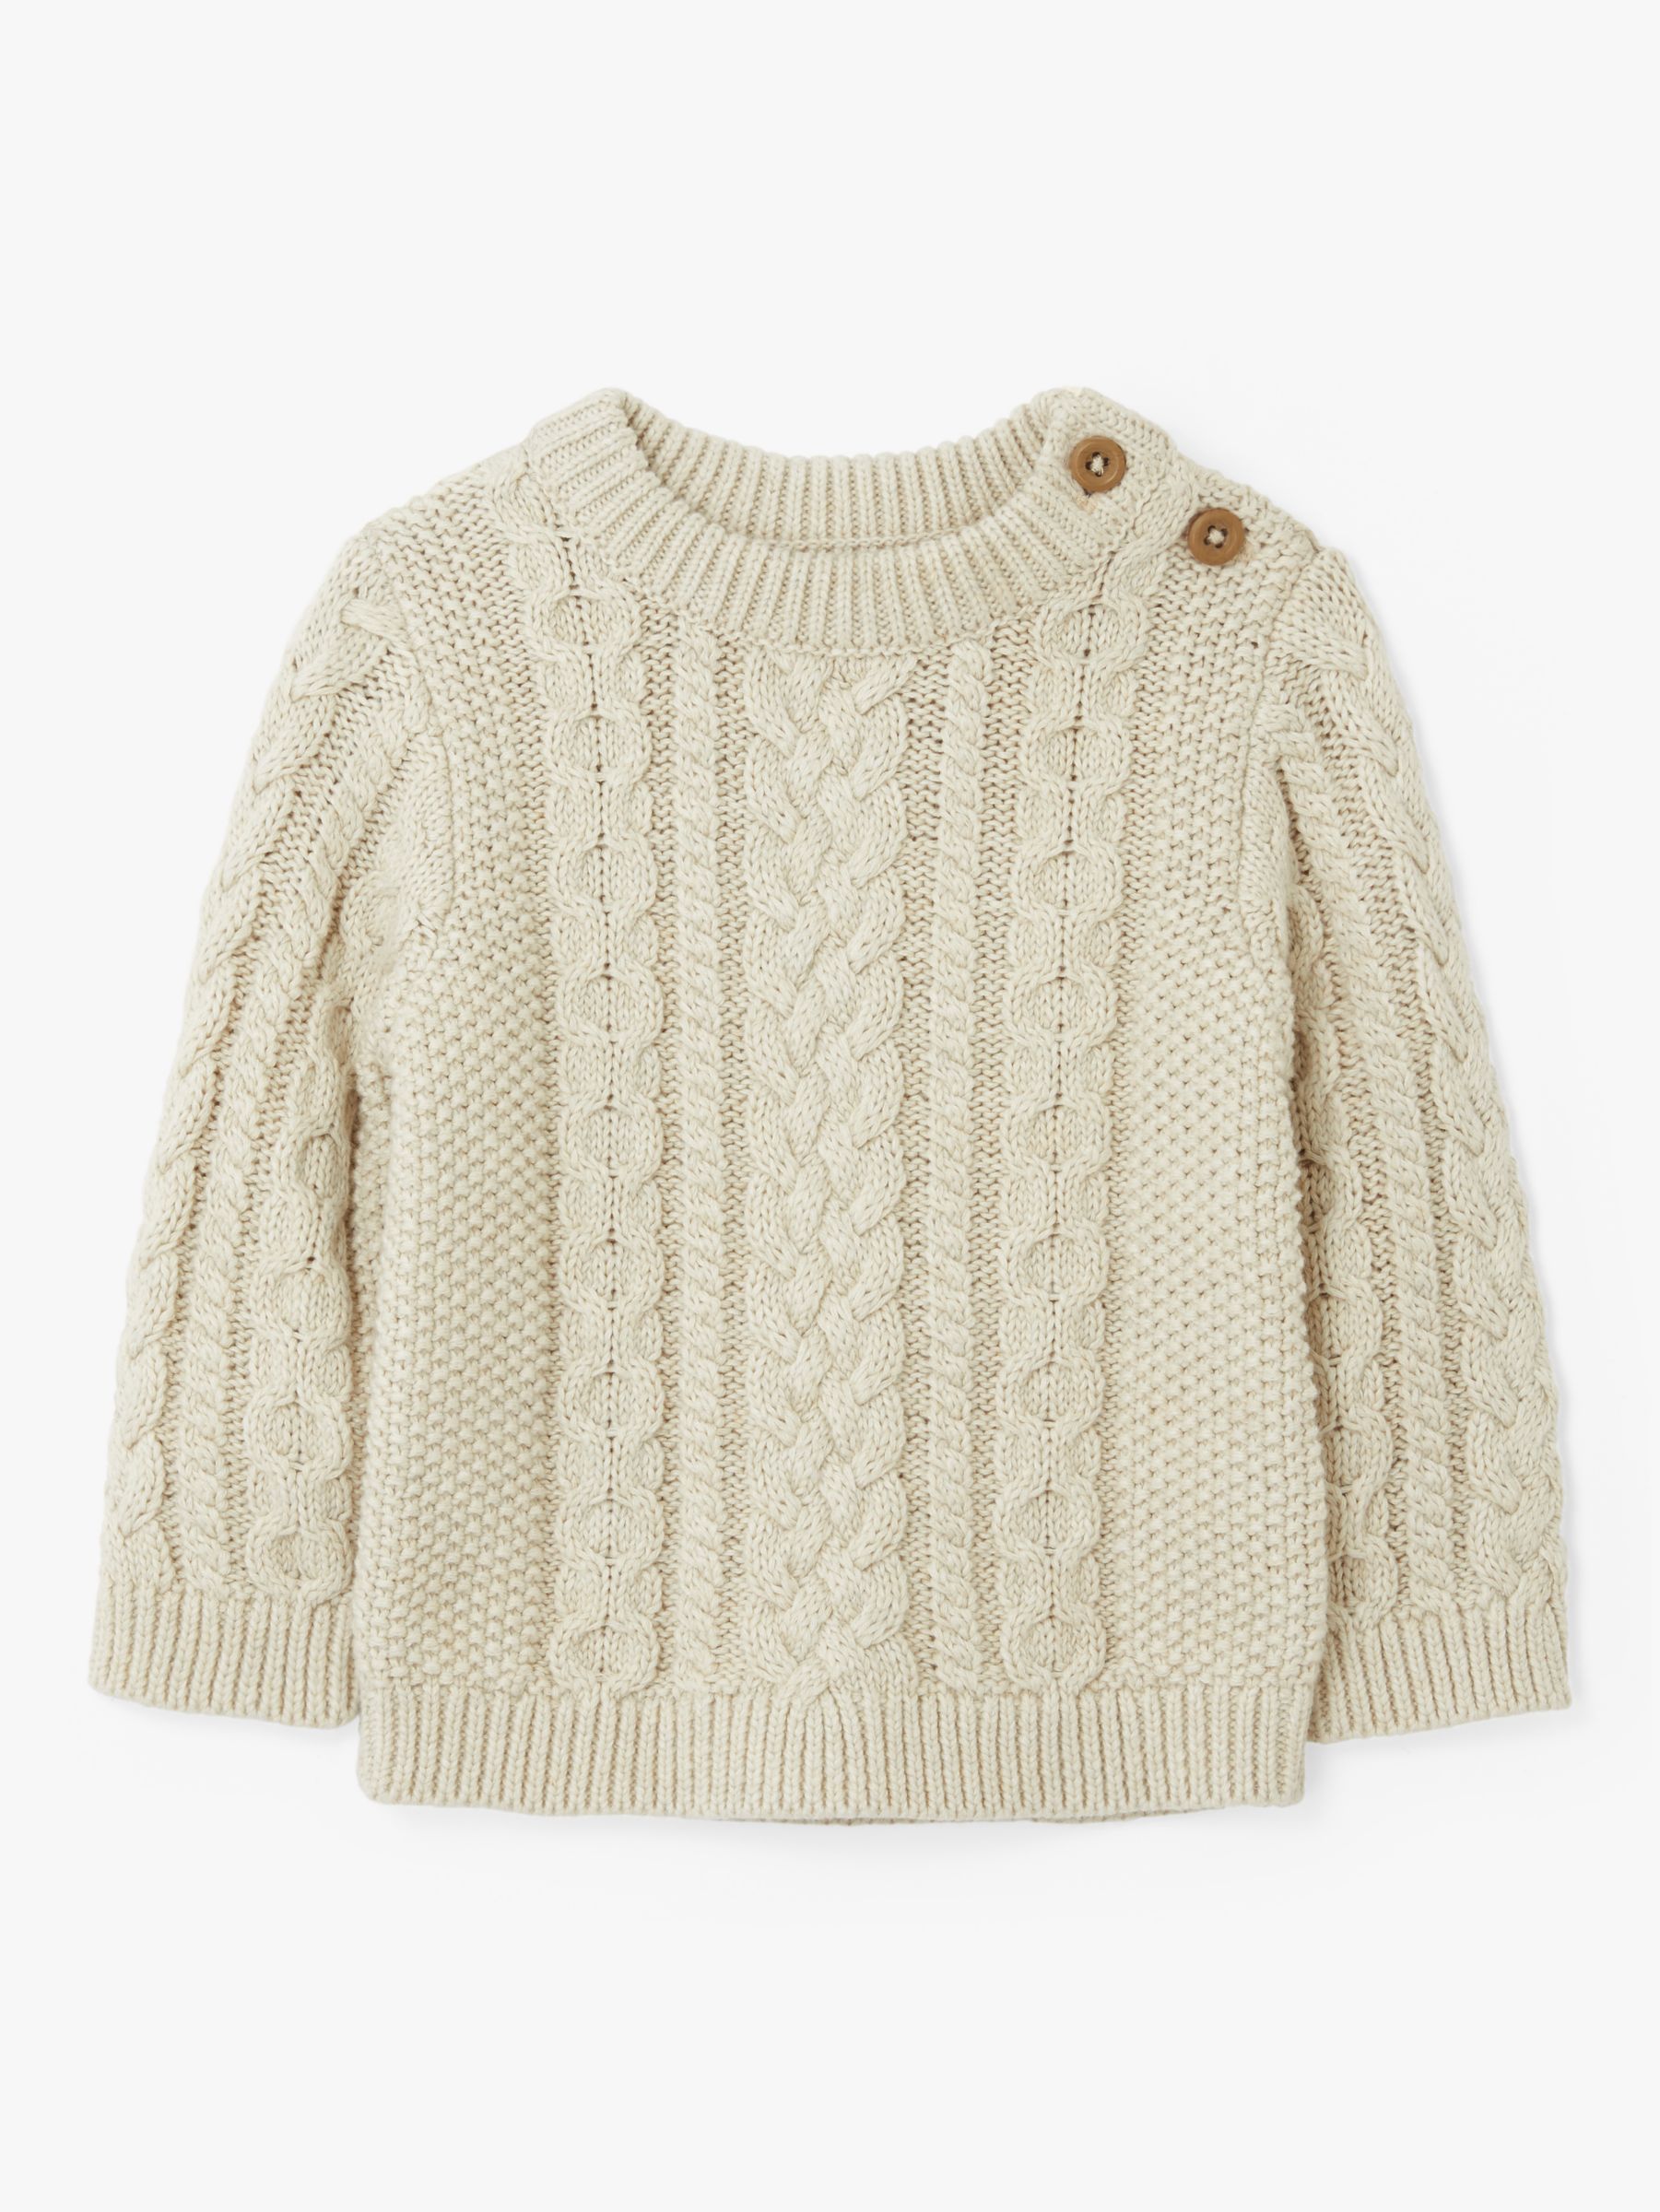 John Lewis Partners Baby Cable Knit Jumper Cream At John Lewis Partners